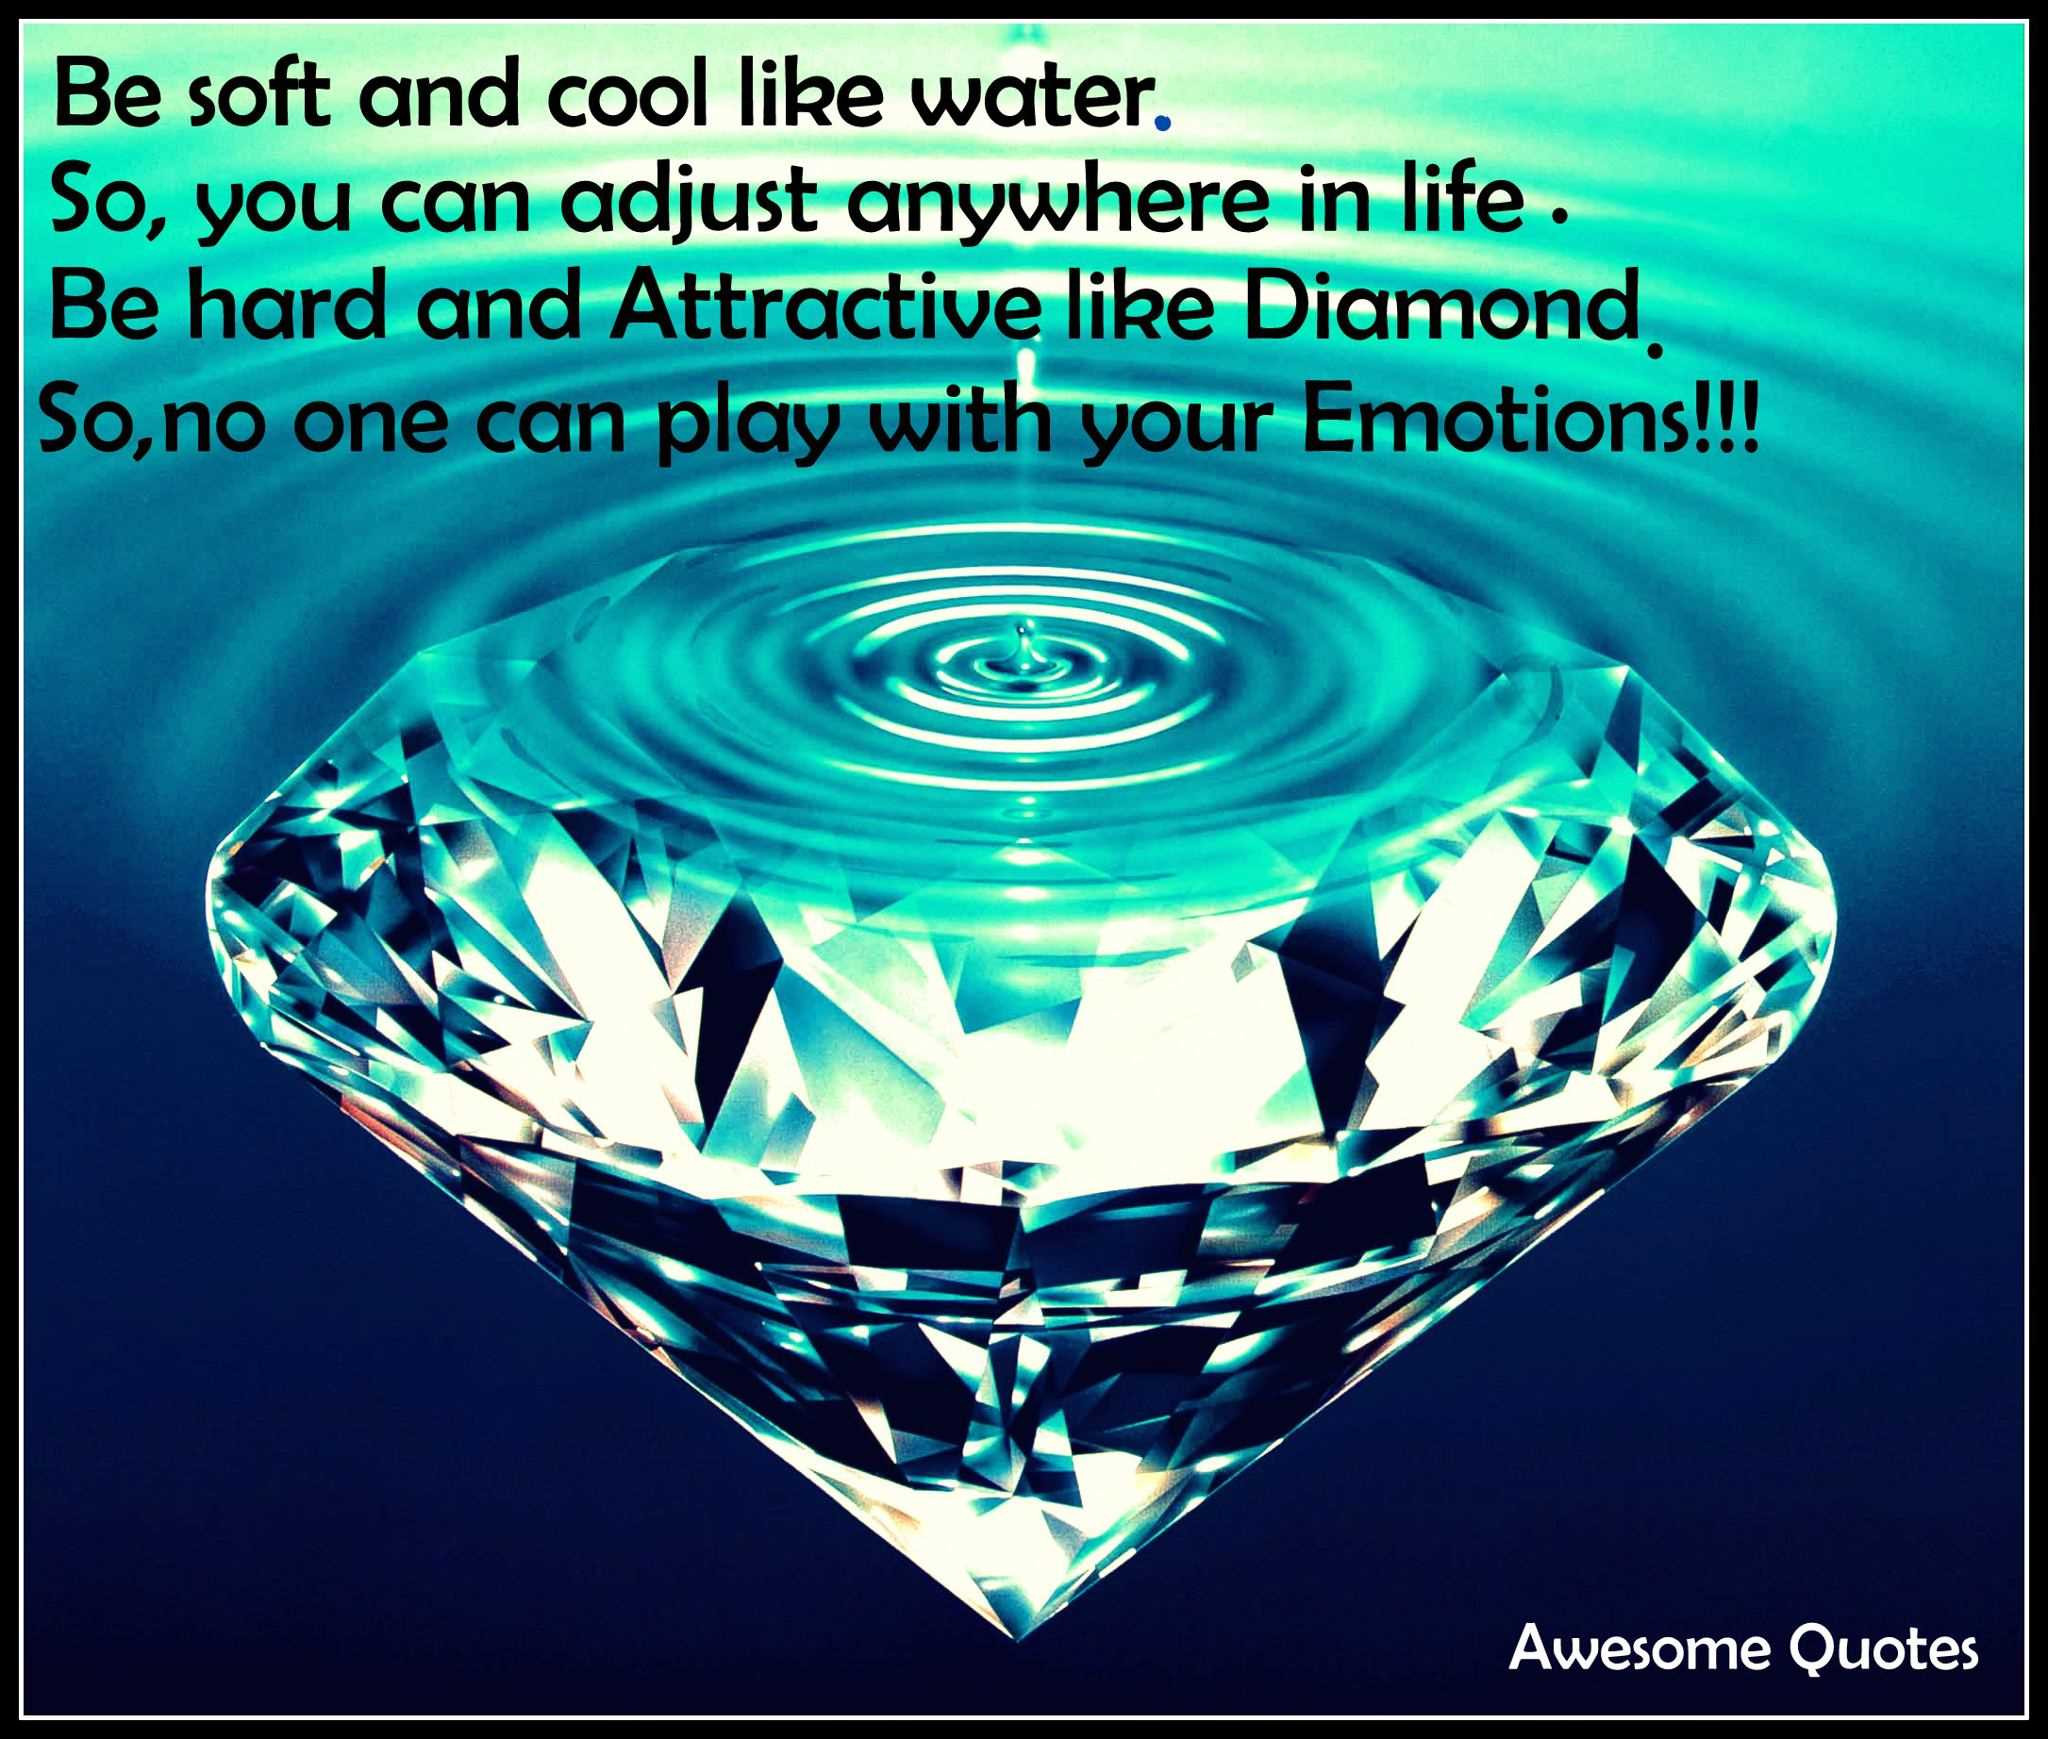 Water Inspirational Quotes
 Inspirational Water Quotes QuotesGram